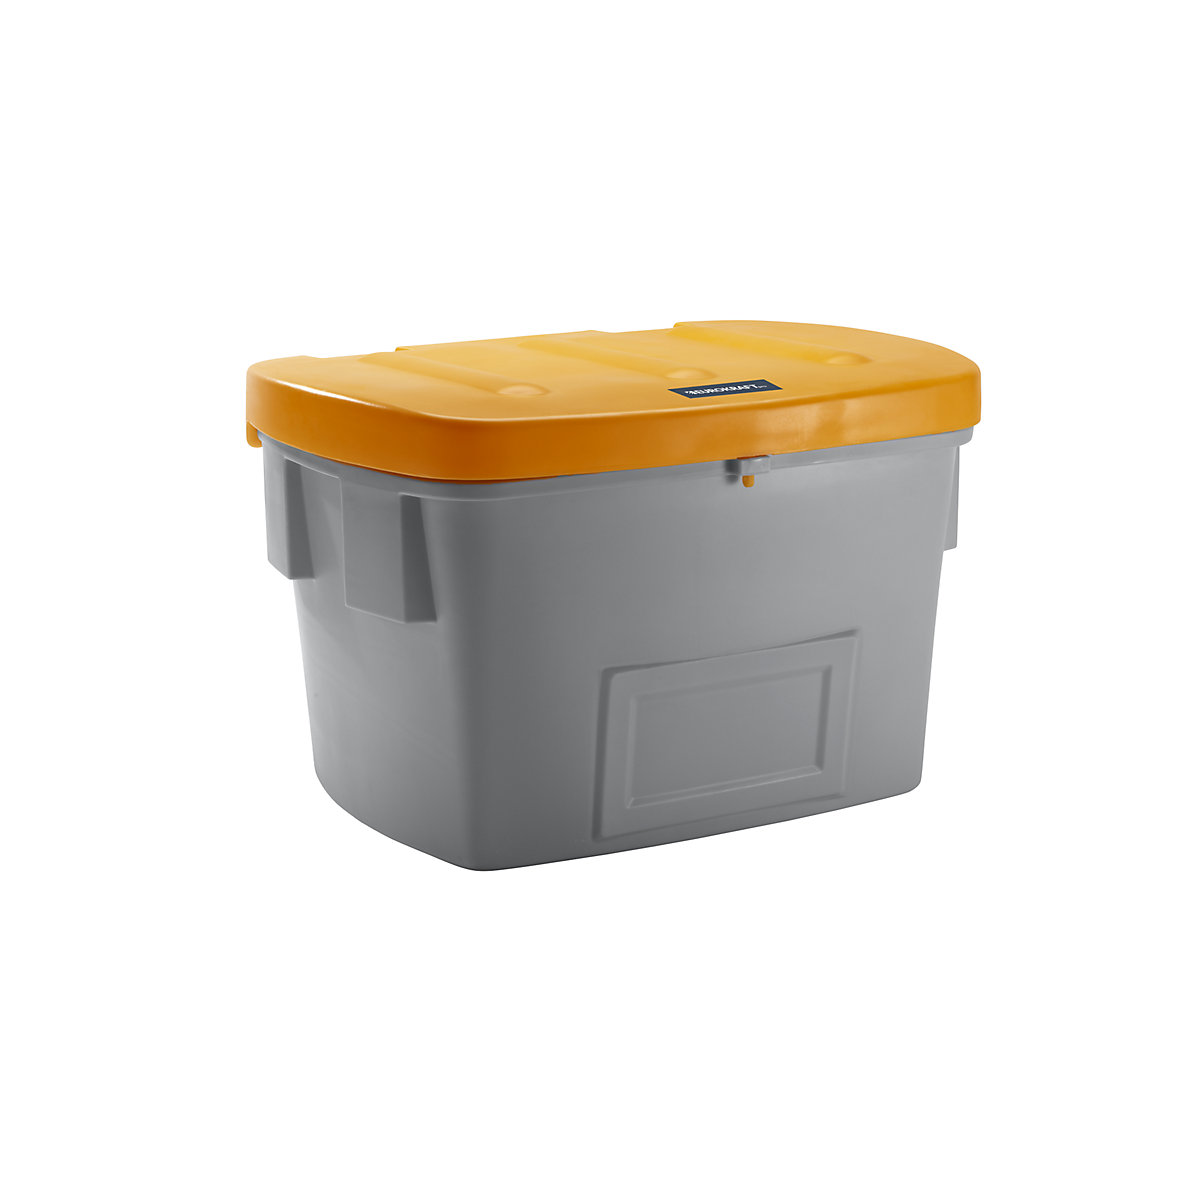 Universal / grit container – eurokraft pro, without dispenser opening, 700 l, orange lid-2